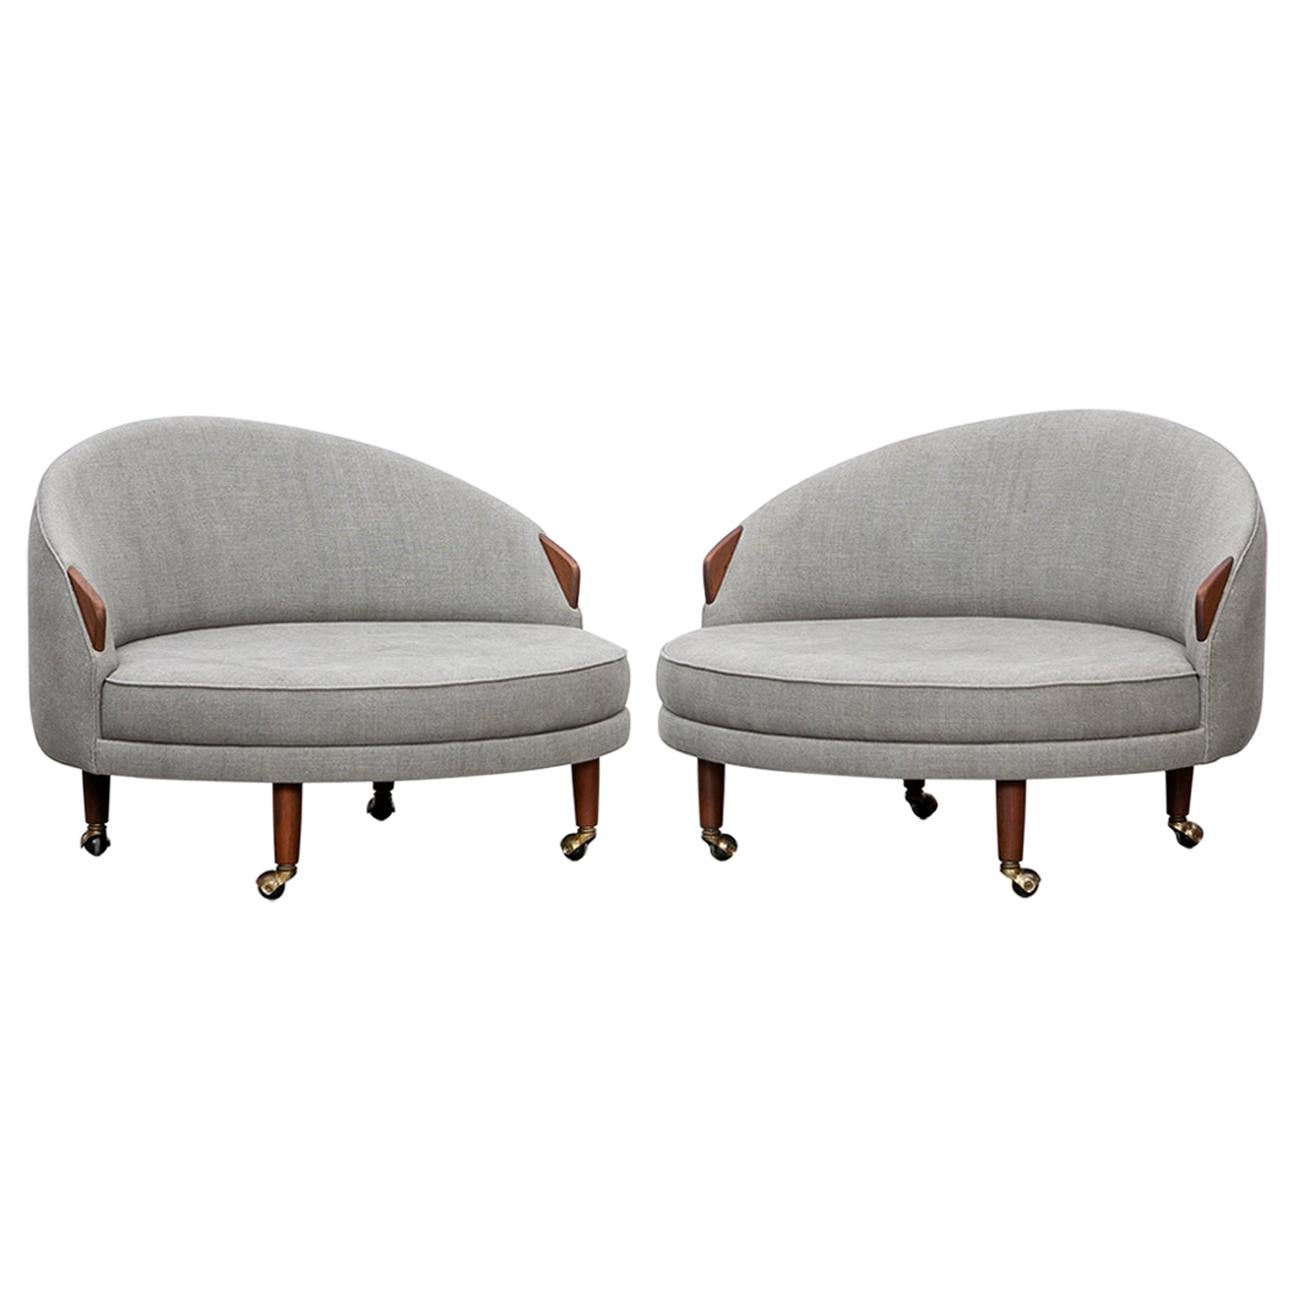 1960s Grey Fabric on Wooden Legs Pair of Lounge Chairs by Adrian Pearsall